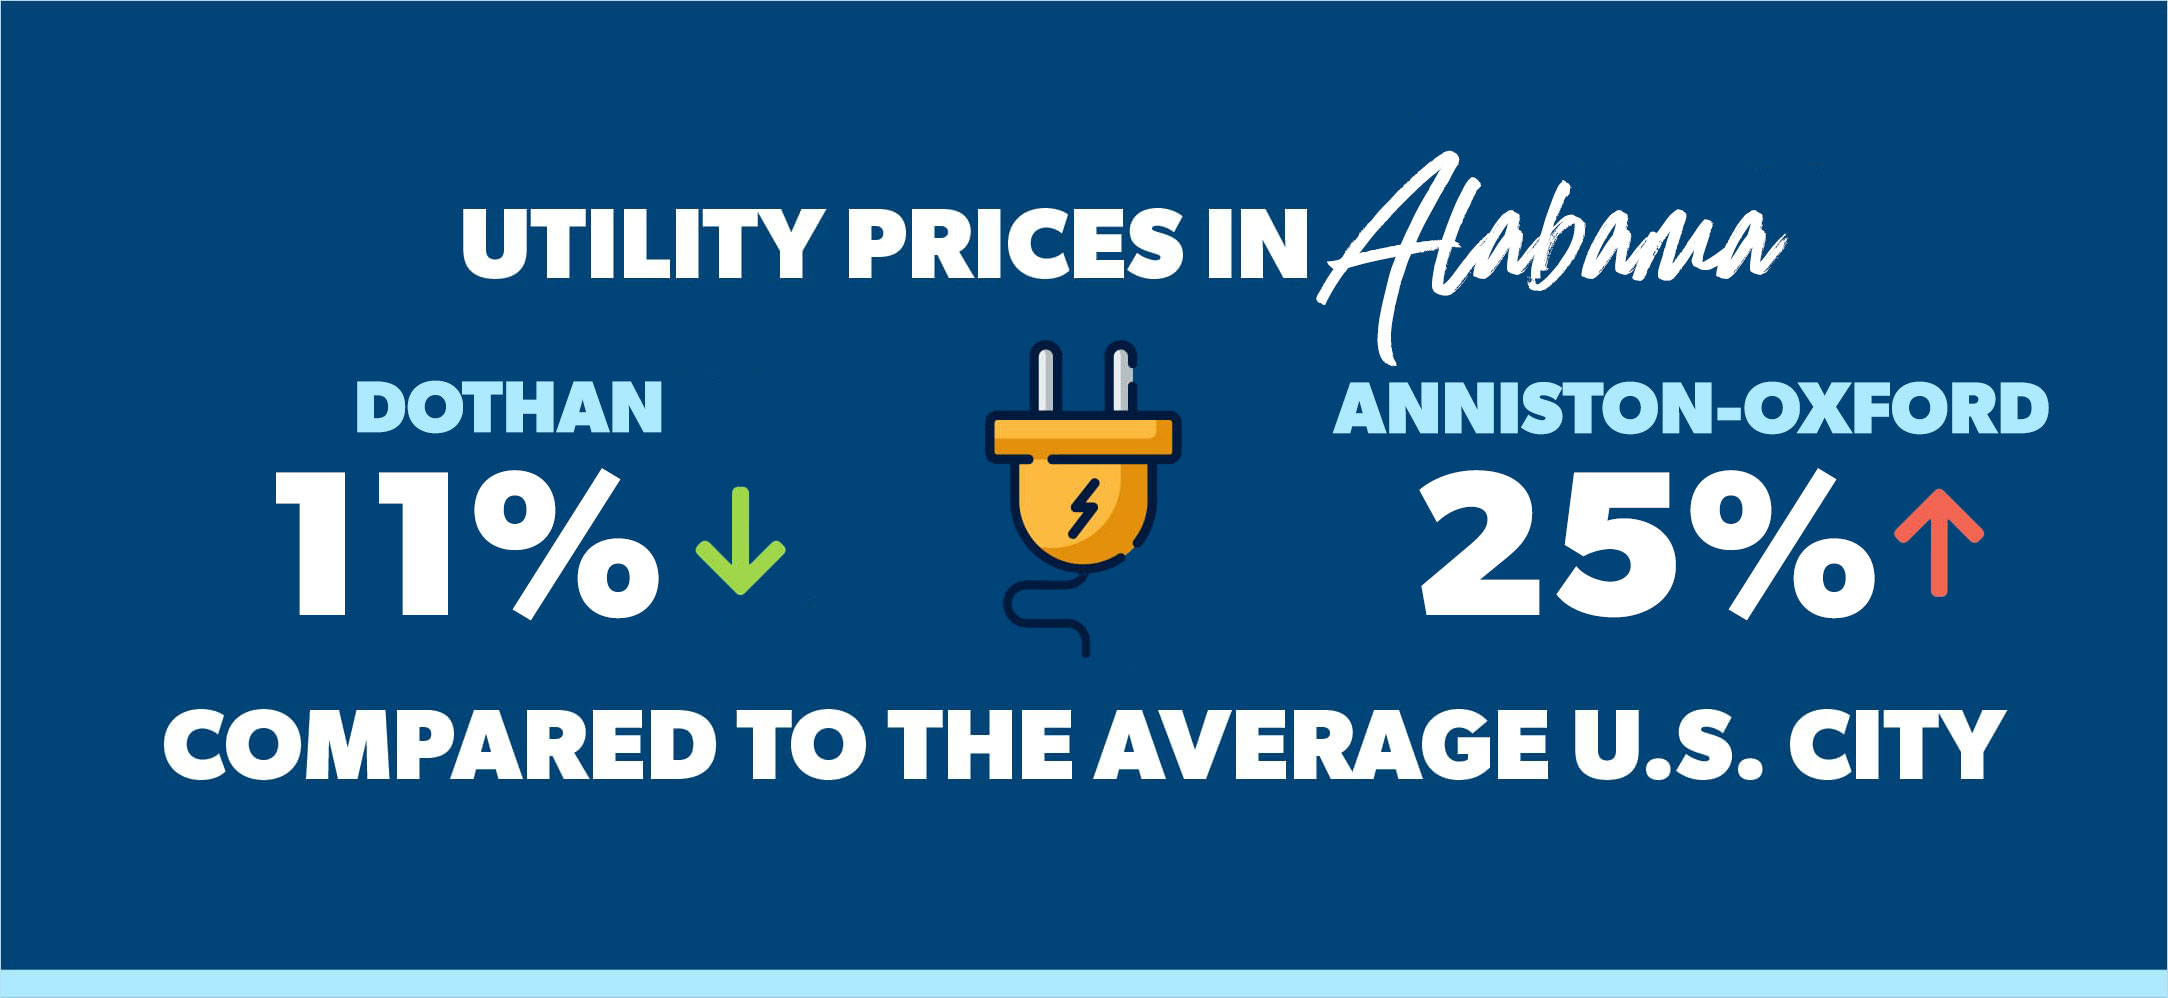 utility prices in Alabama